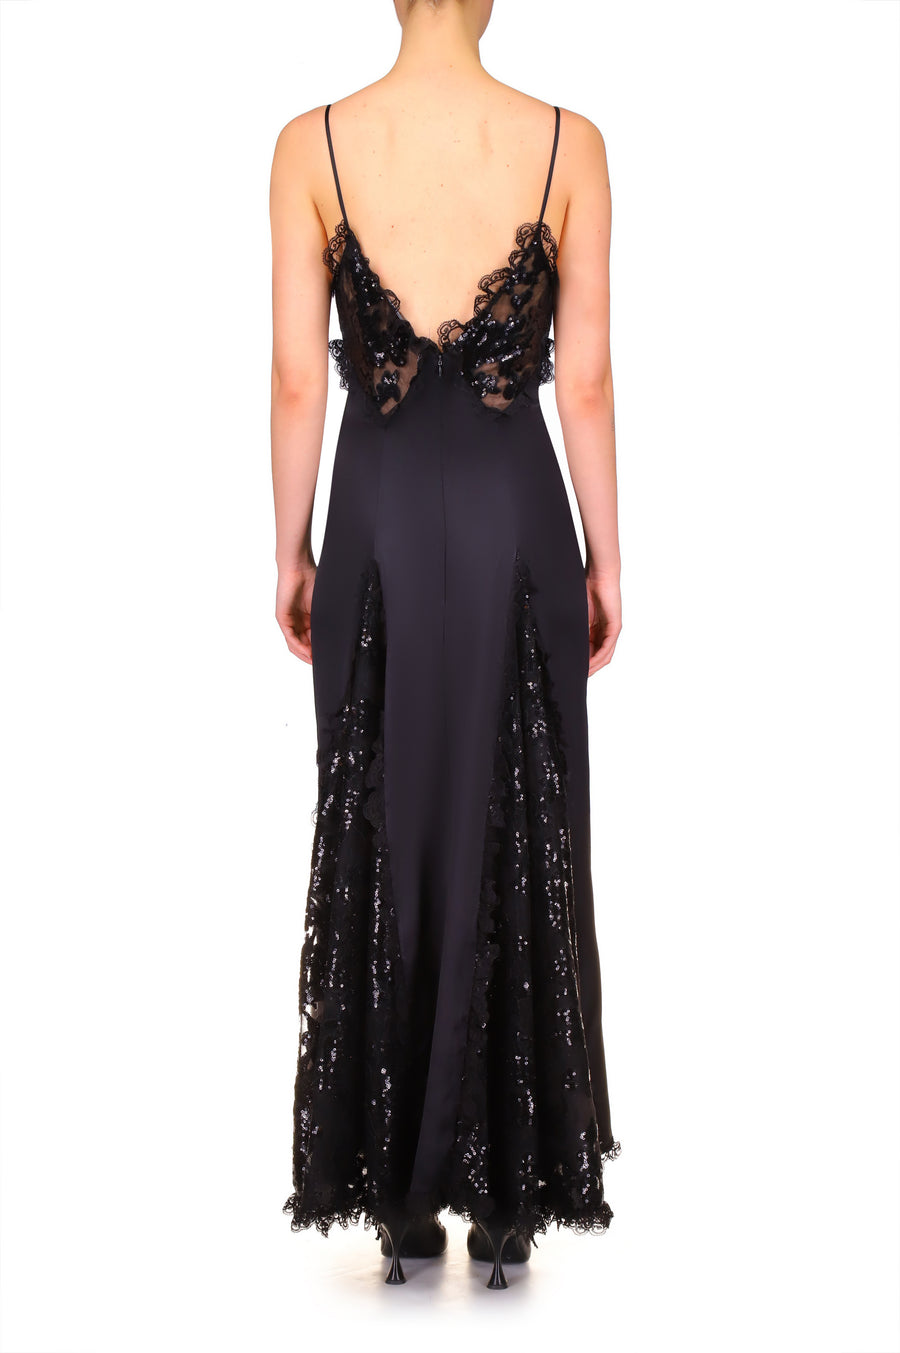 Black Silk Satin And Black Sequin Dress With Godet And Lace Ruffle